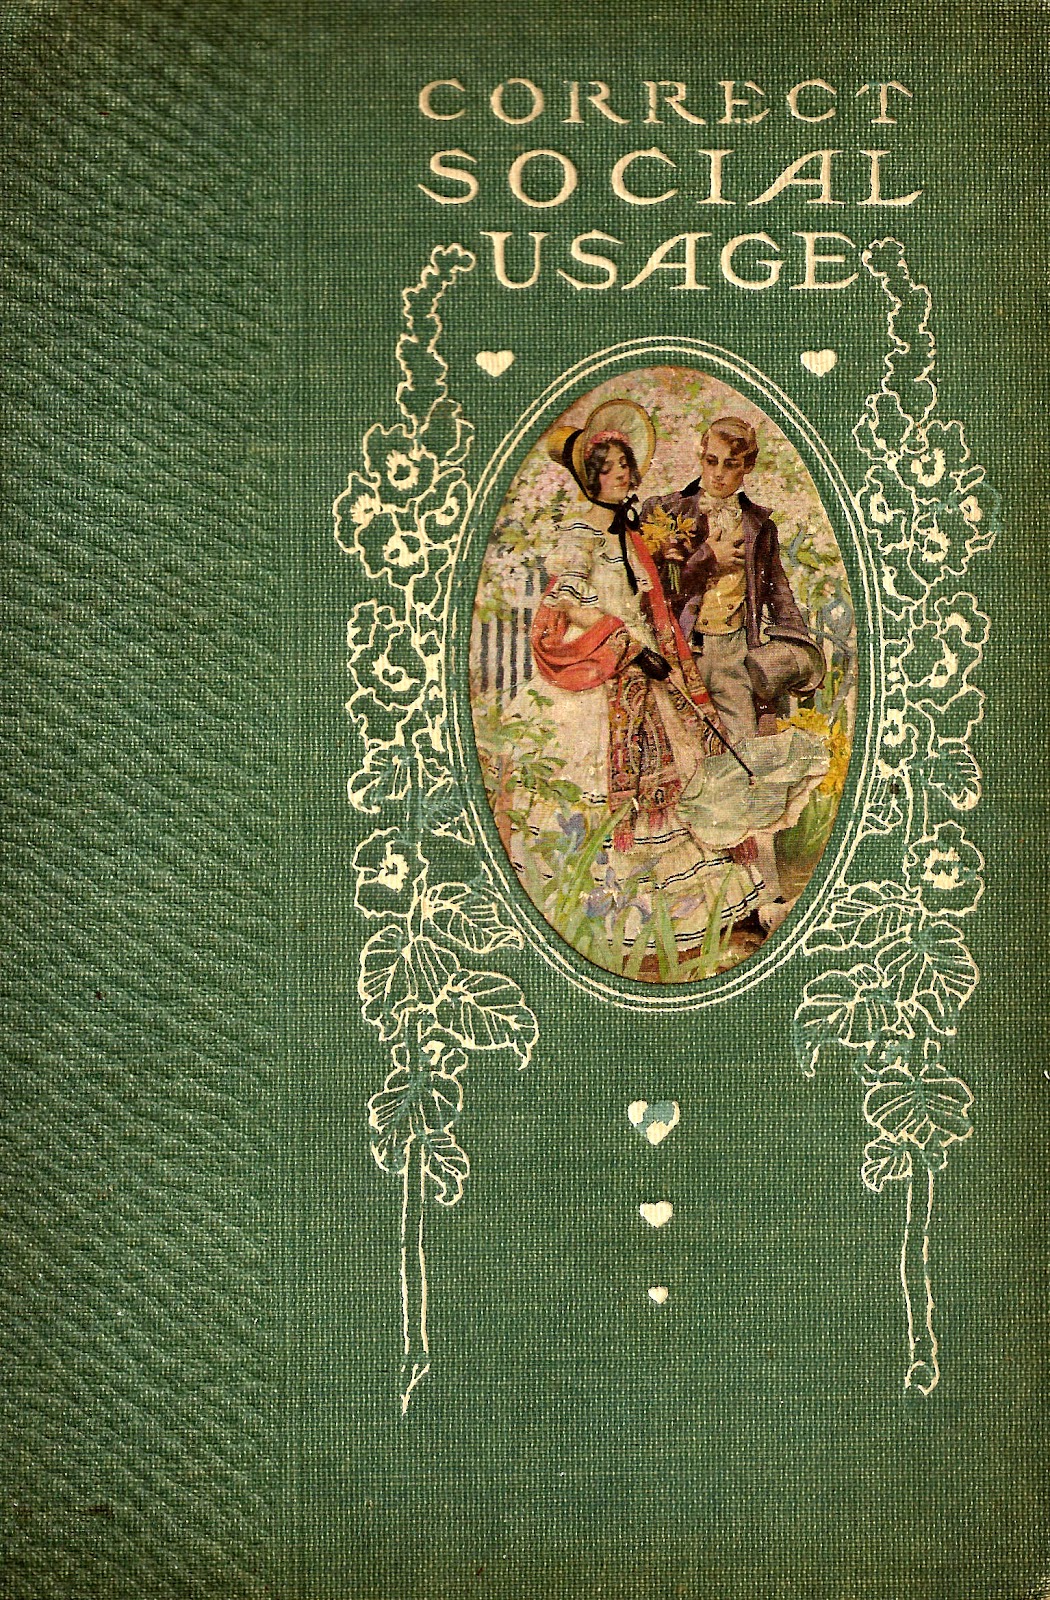 Antique Images: Free Vintage Book Cover: Green Victorian Book Cover of ...